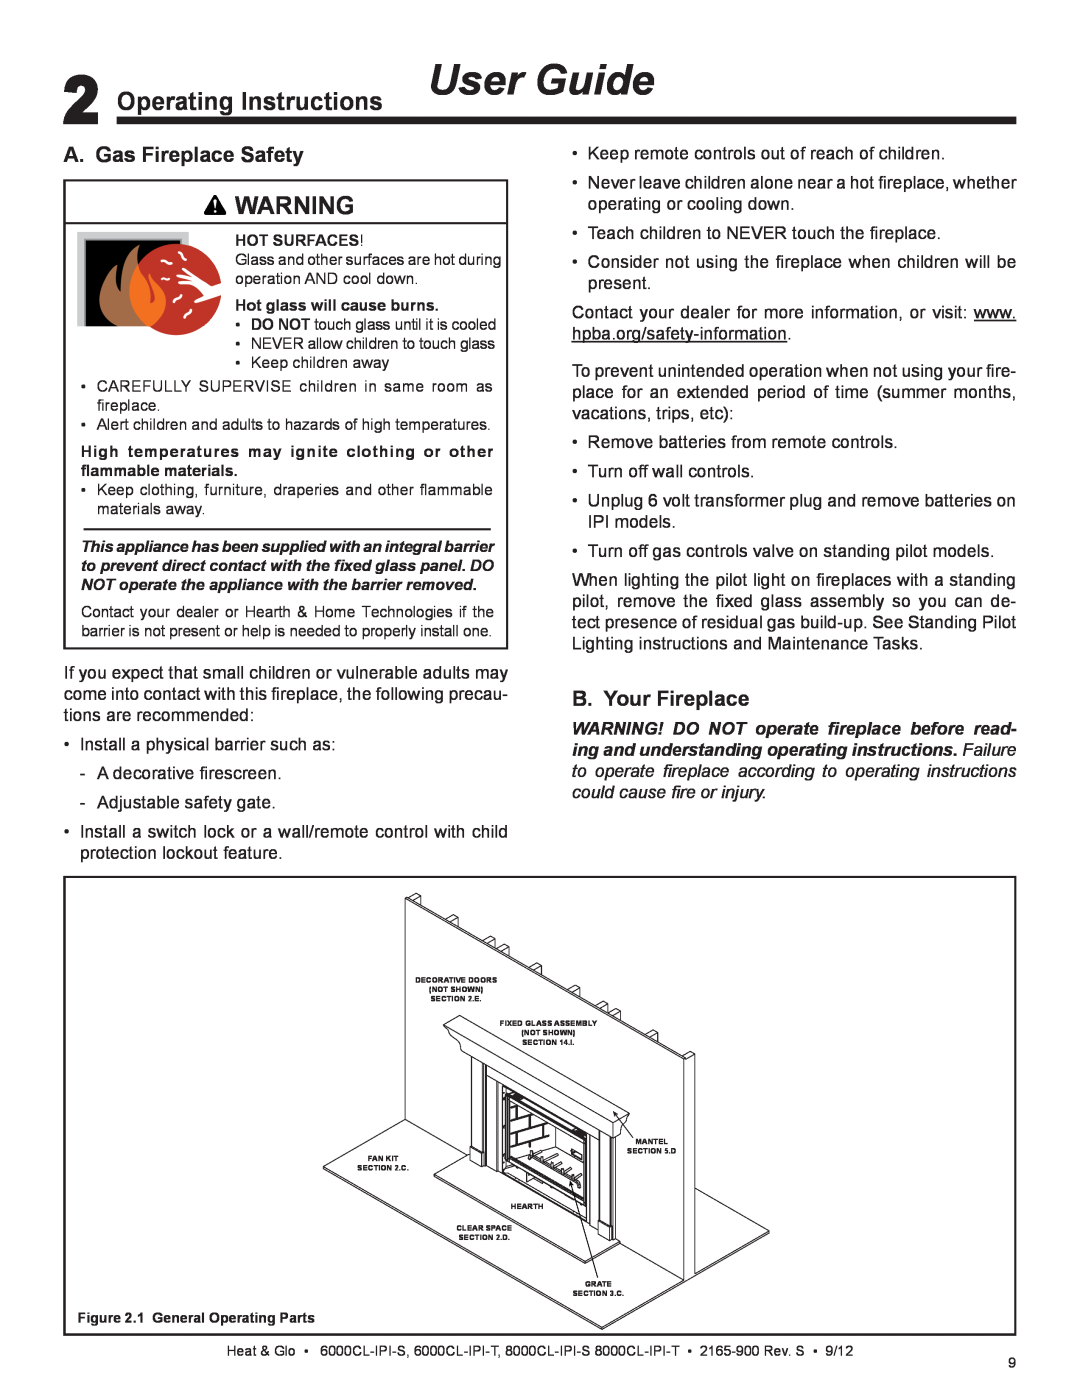 Heat & Glo LifeStyle 8000CL-IPI-T manual Operating Instructions User Guide, A. Gas Fireplace Safety, B. Your Fireplace 